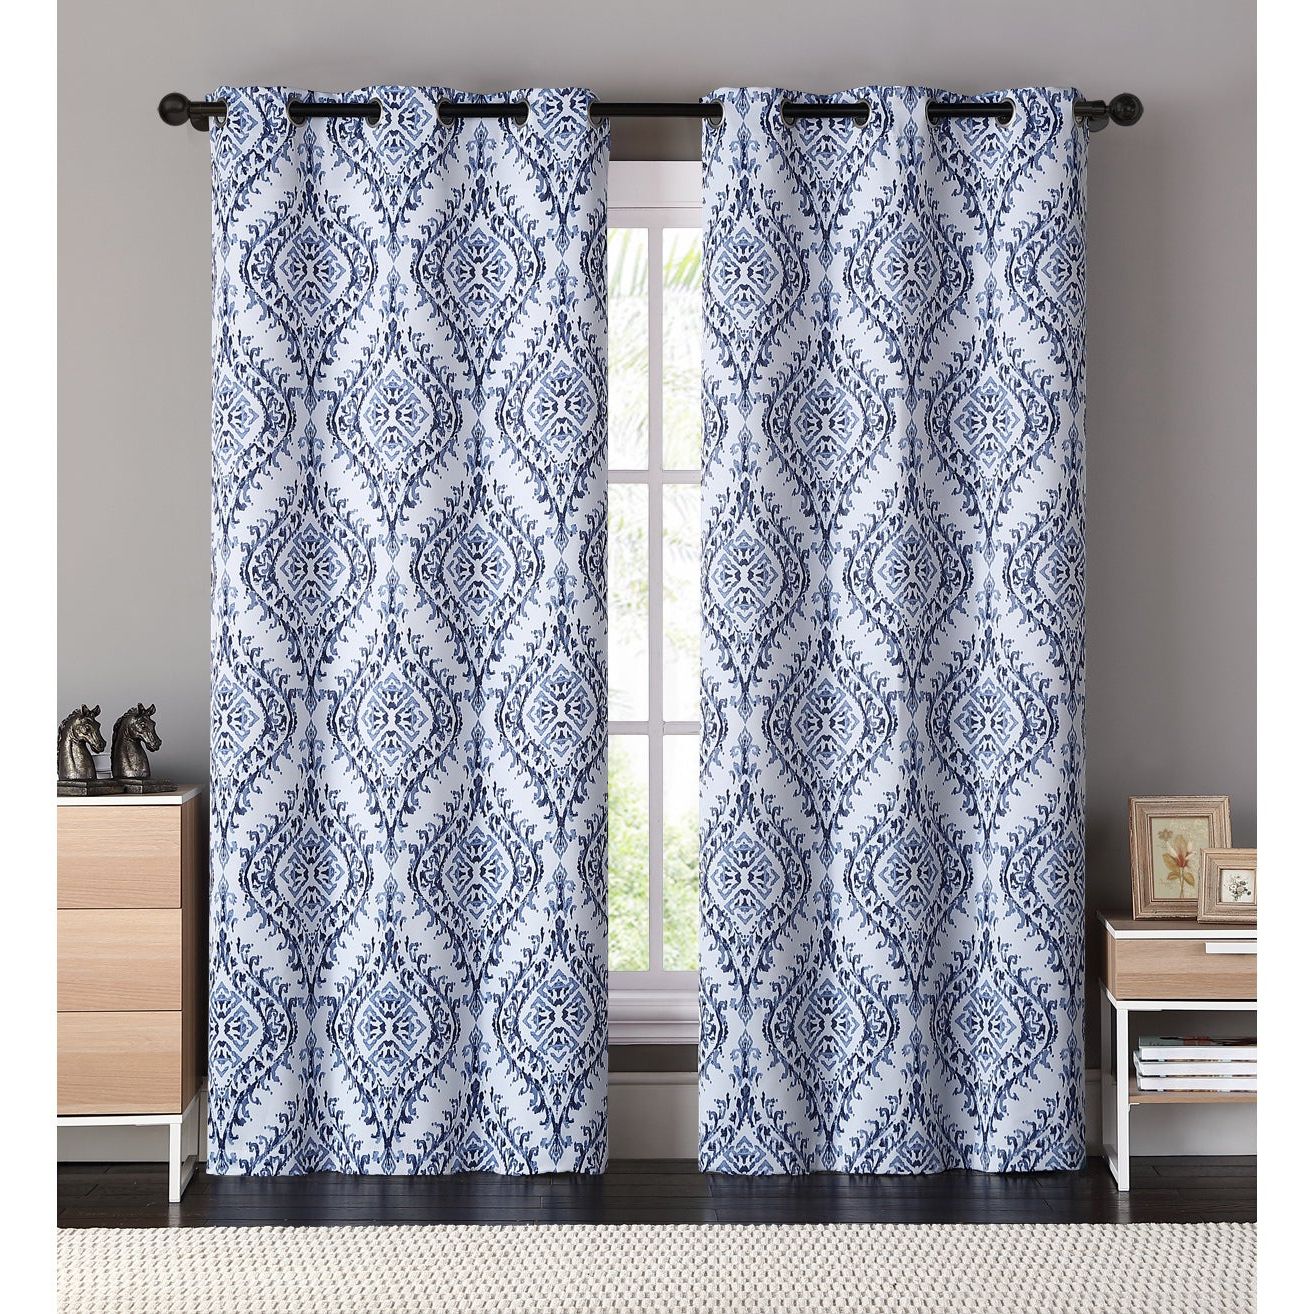 Overstock Shopping – The Best  Deals On Curtains Regarding Trendy London Blackout Panel Pair (View 1 of 20)